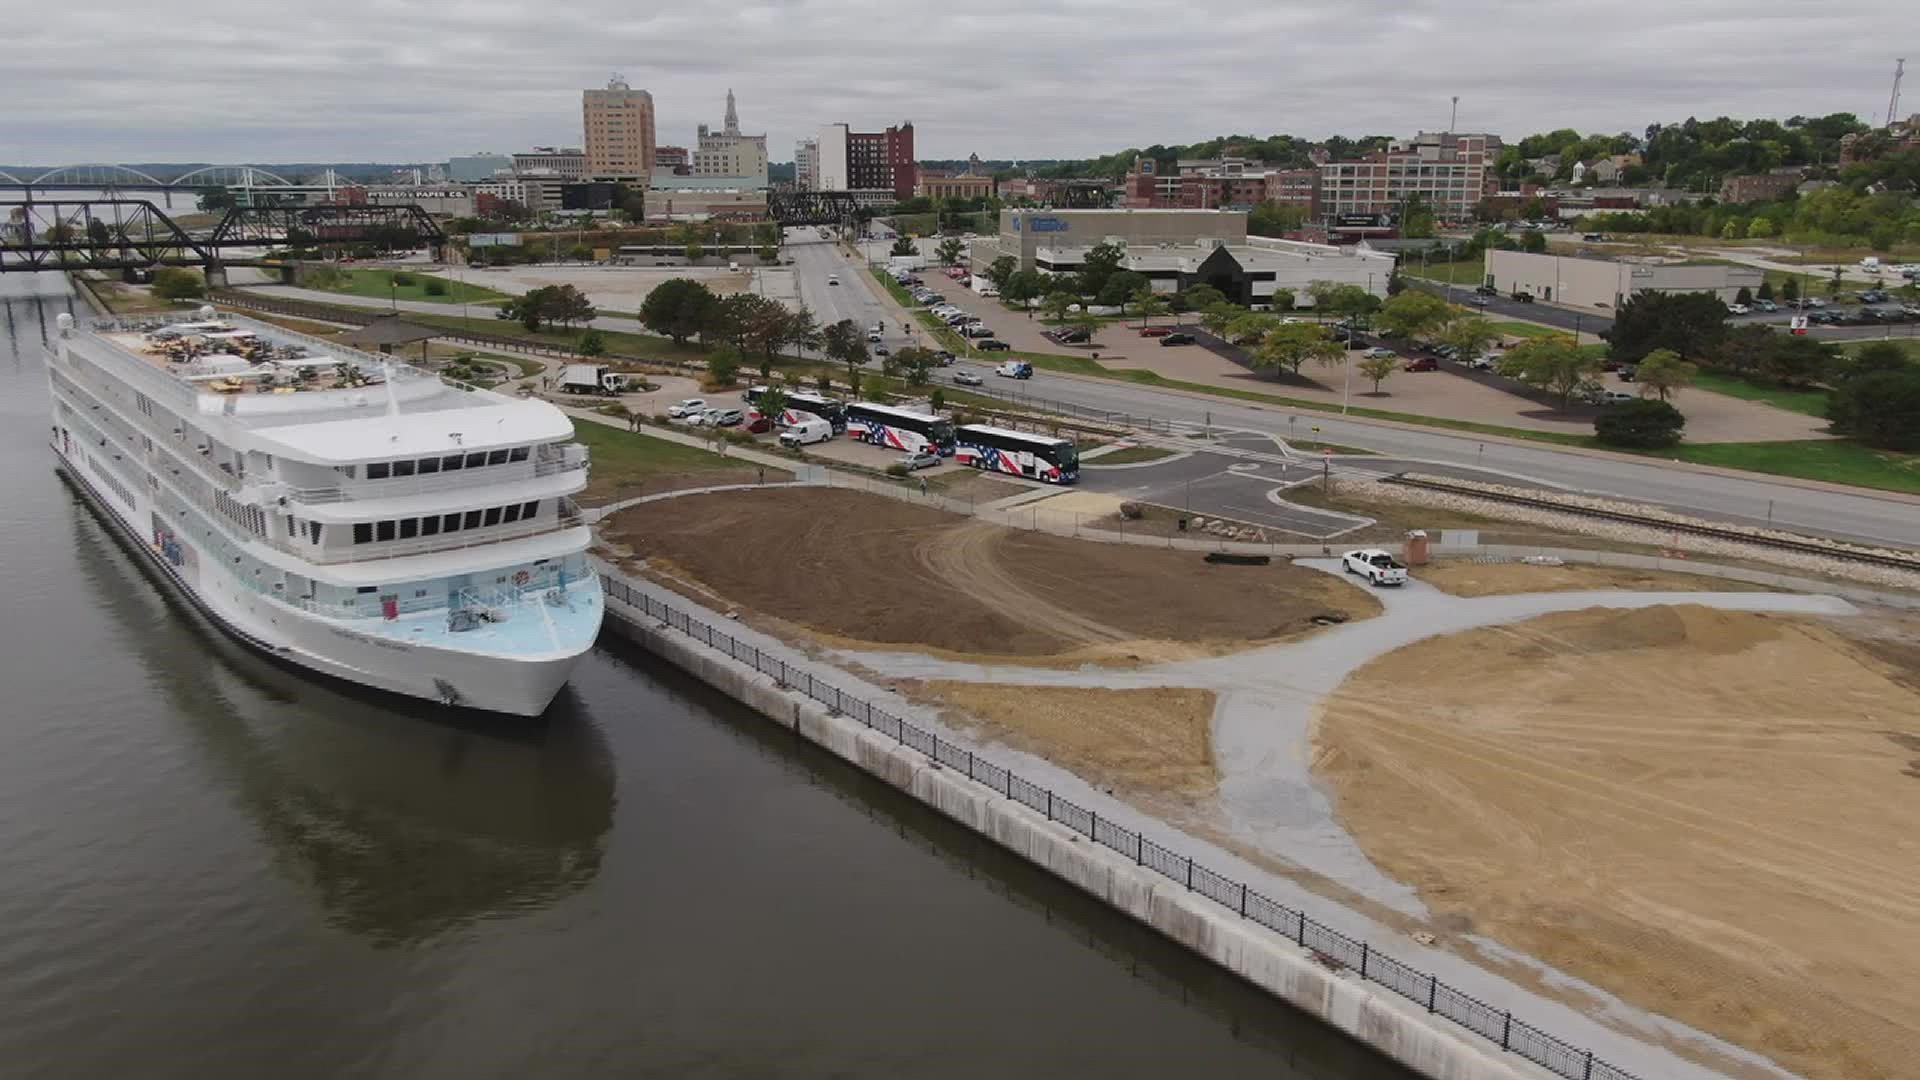 Roughly 200 people visit the Quad Cities every week on the cruise lines